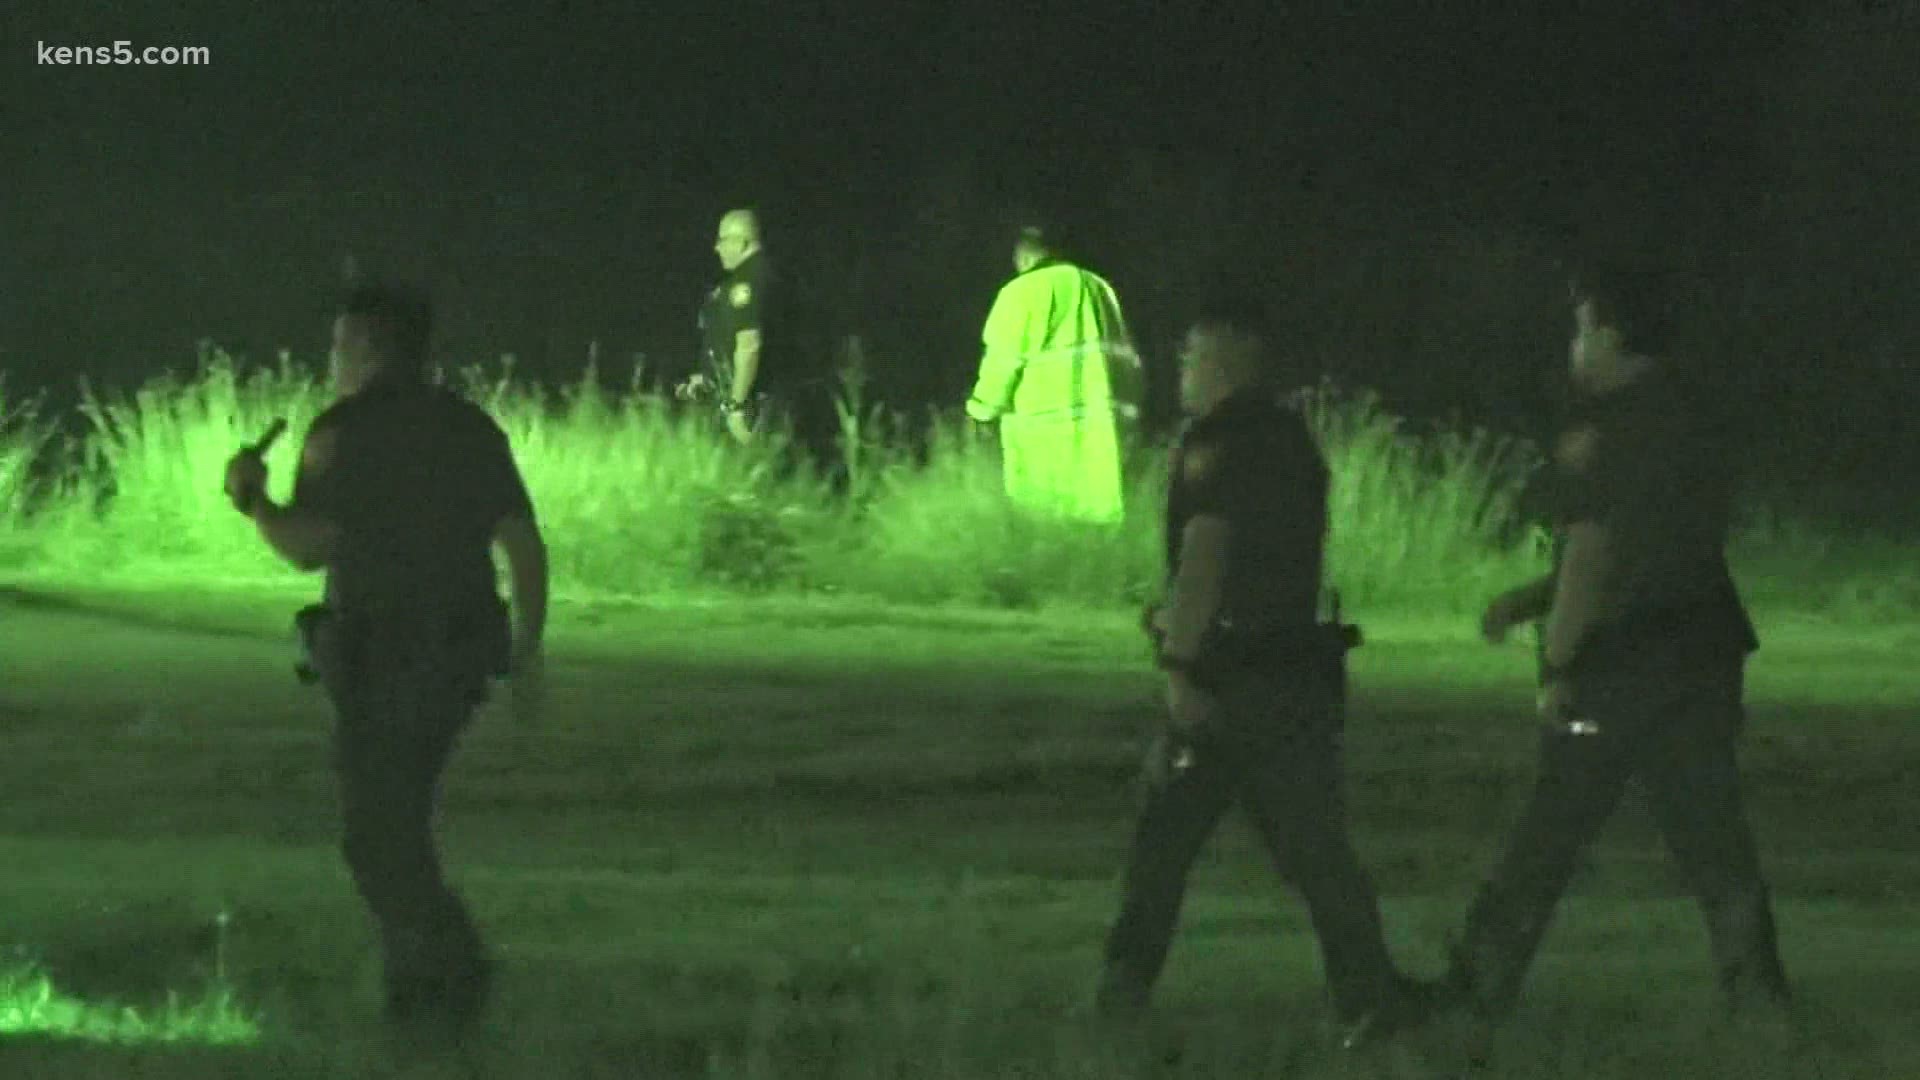 The San Antonio Police Department detained at least 29 people who were transported inside an 18-wheeler from Laredo.